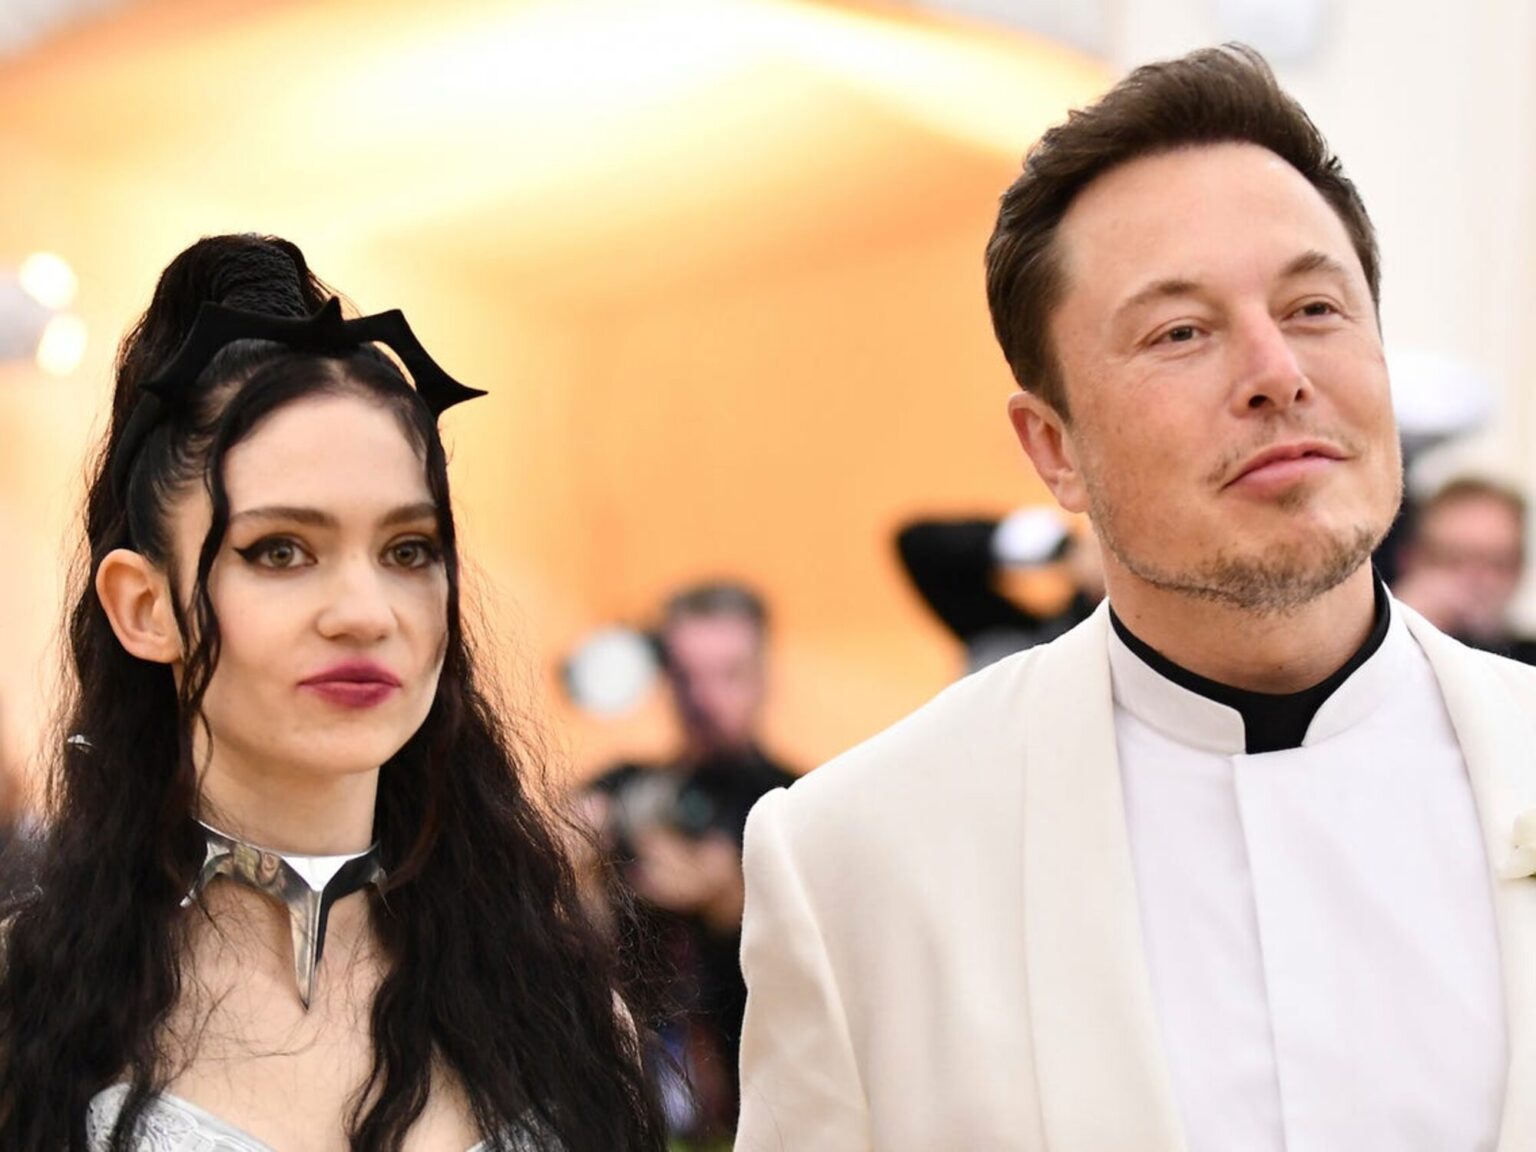 Elon Musk is now the richest person in the world. While unmarried, he's dating the musician Grimes. Get to know his famous girlfriend.